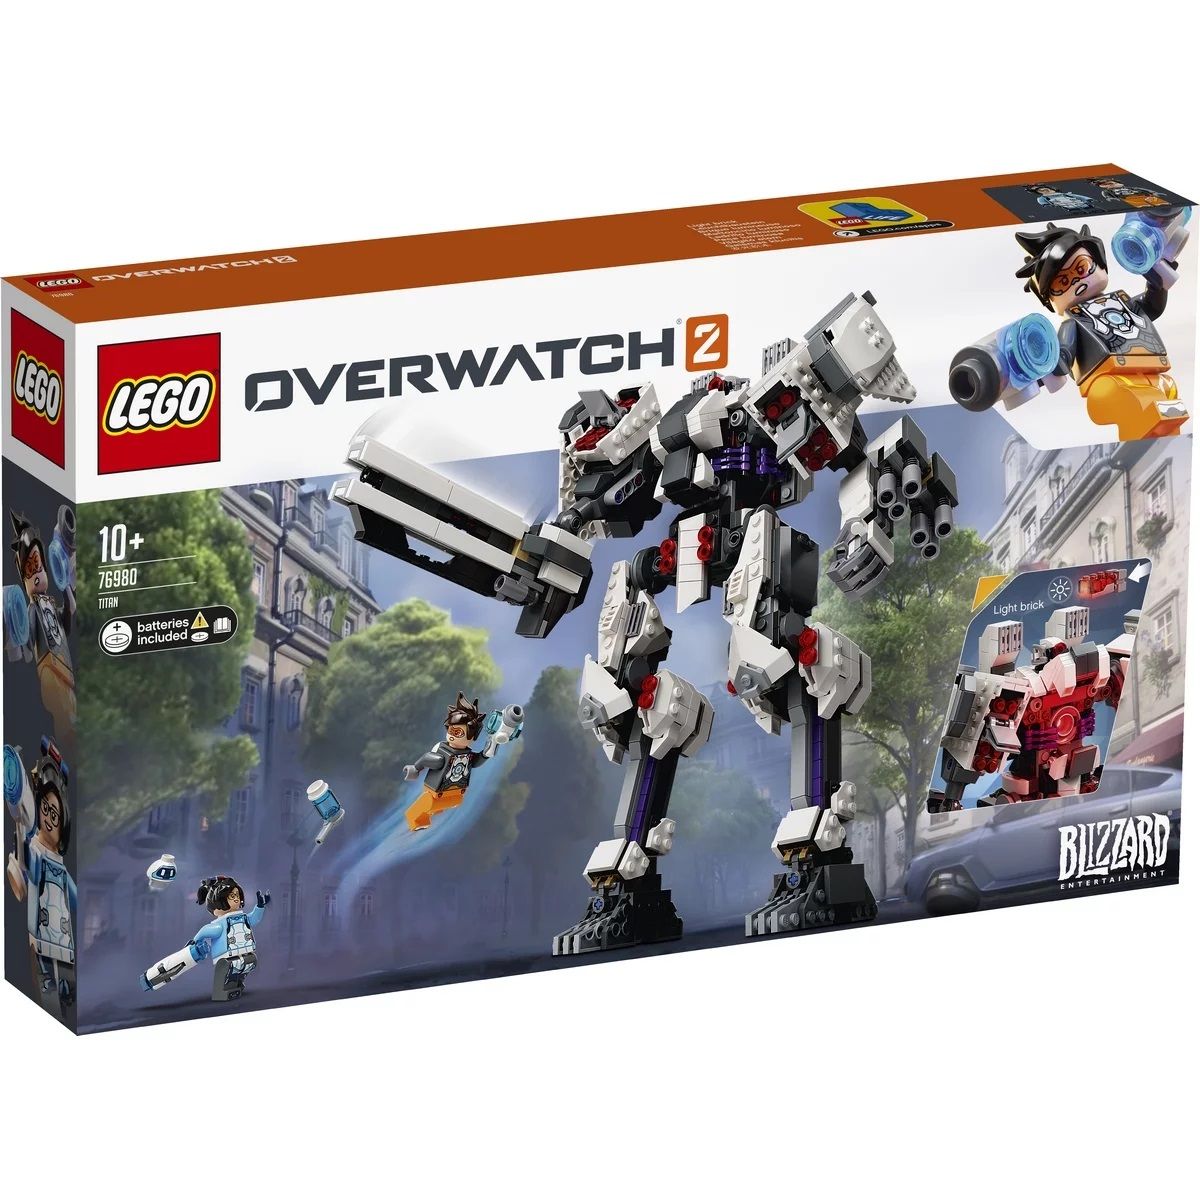 LEGO Overwatch 2 Titan Set (76980) February Release on Hold